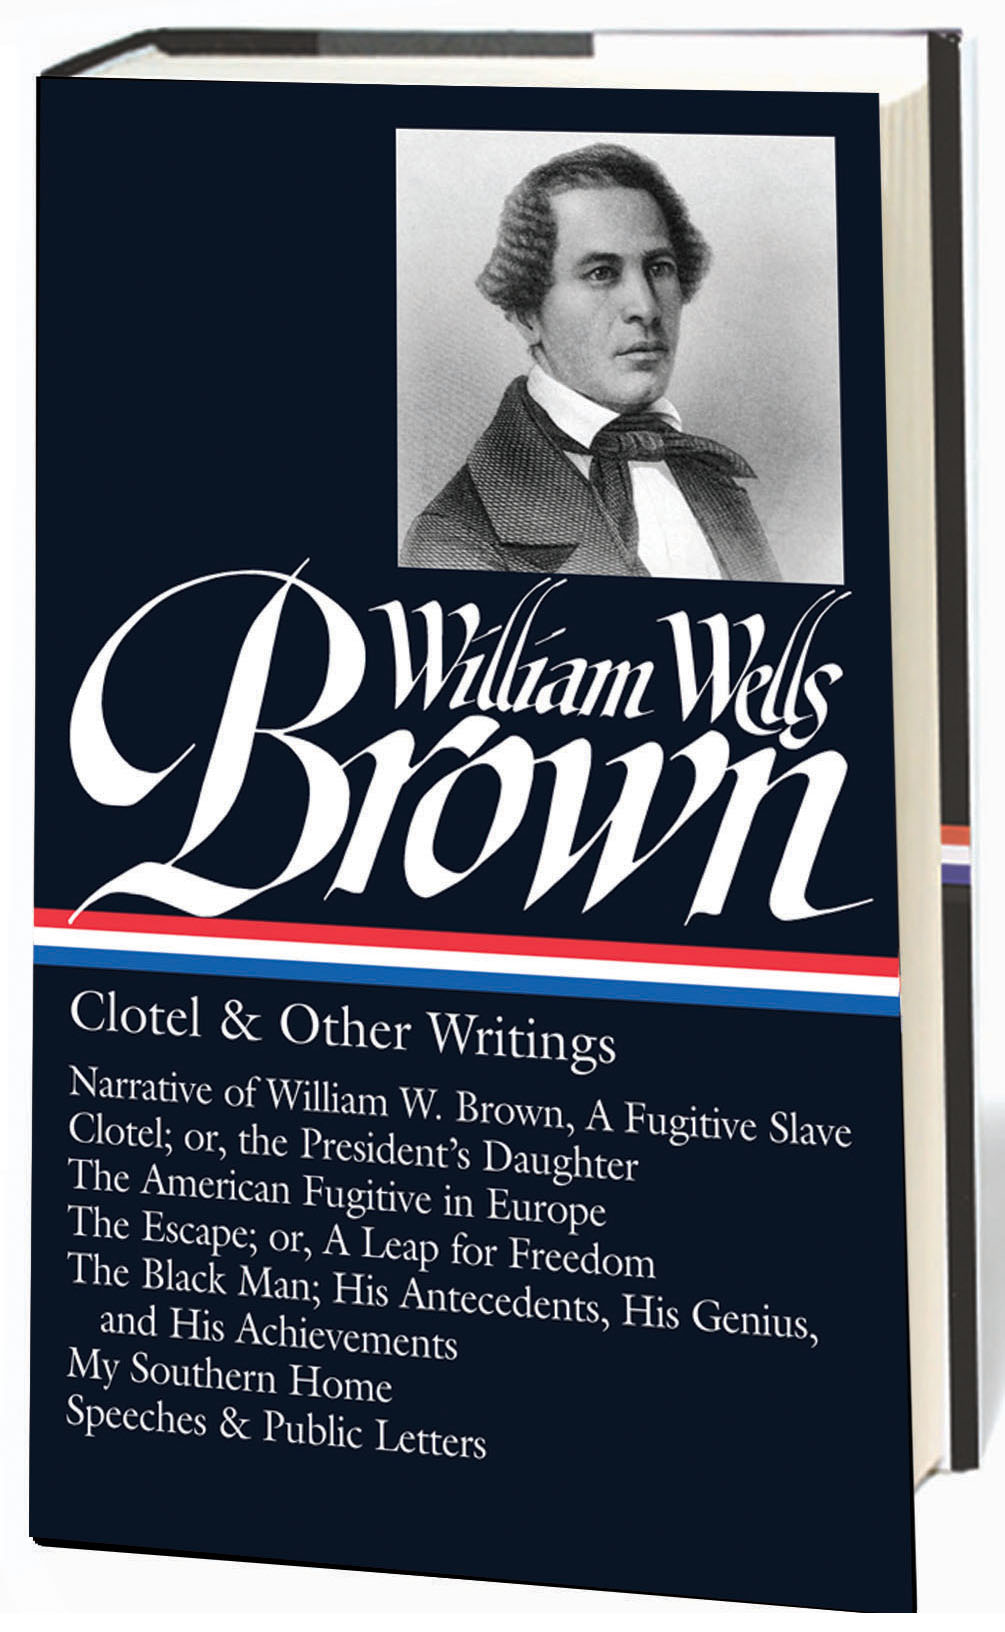 Collection of stories by William Wells Brown